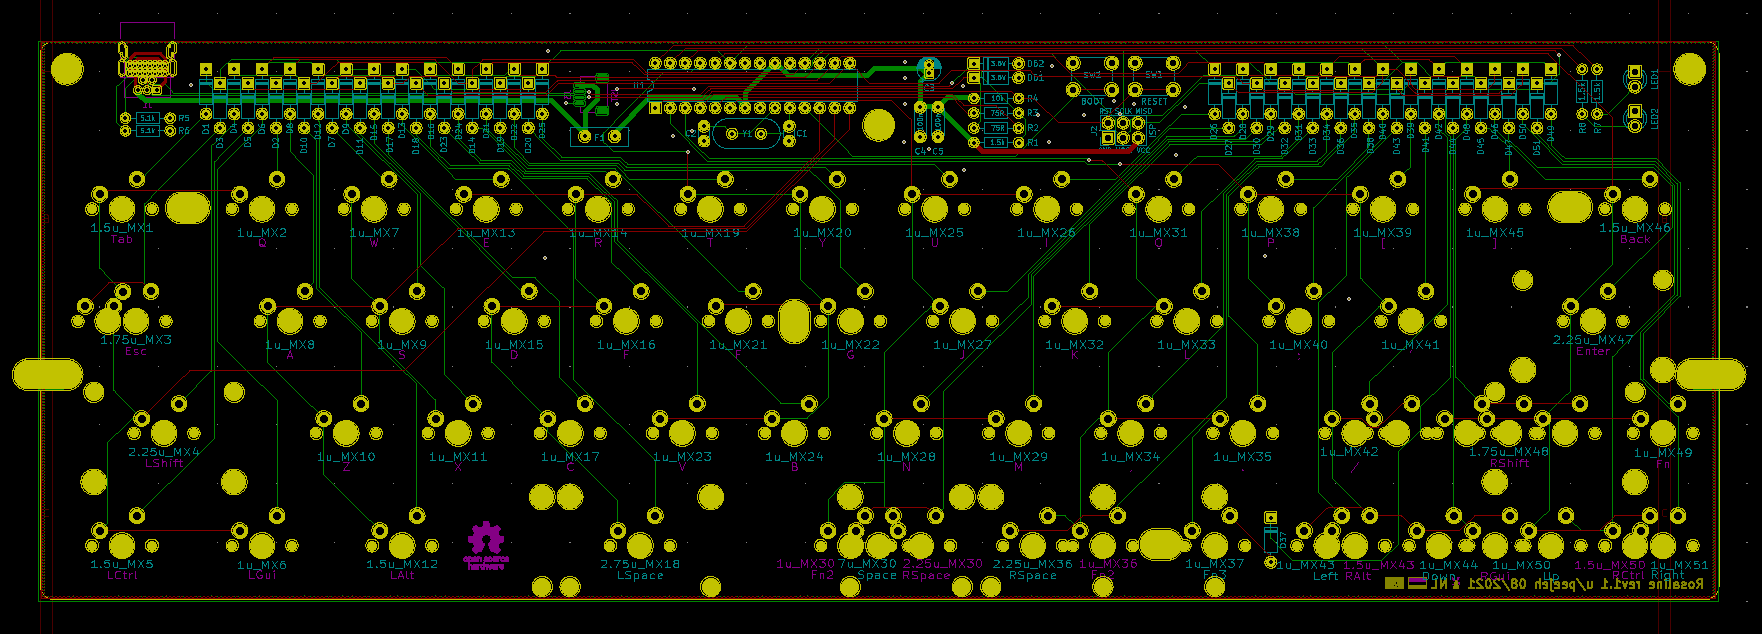 pcb-staggered-design.png